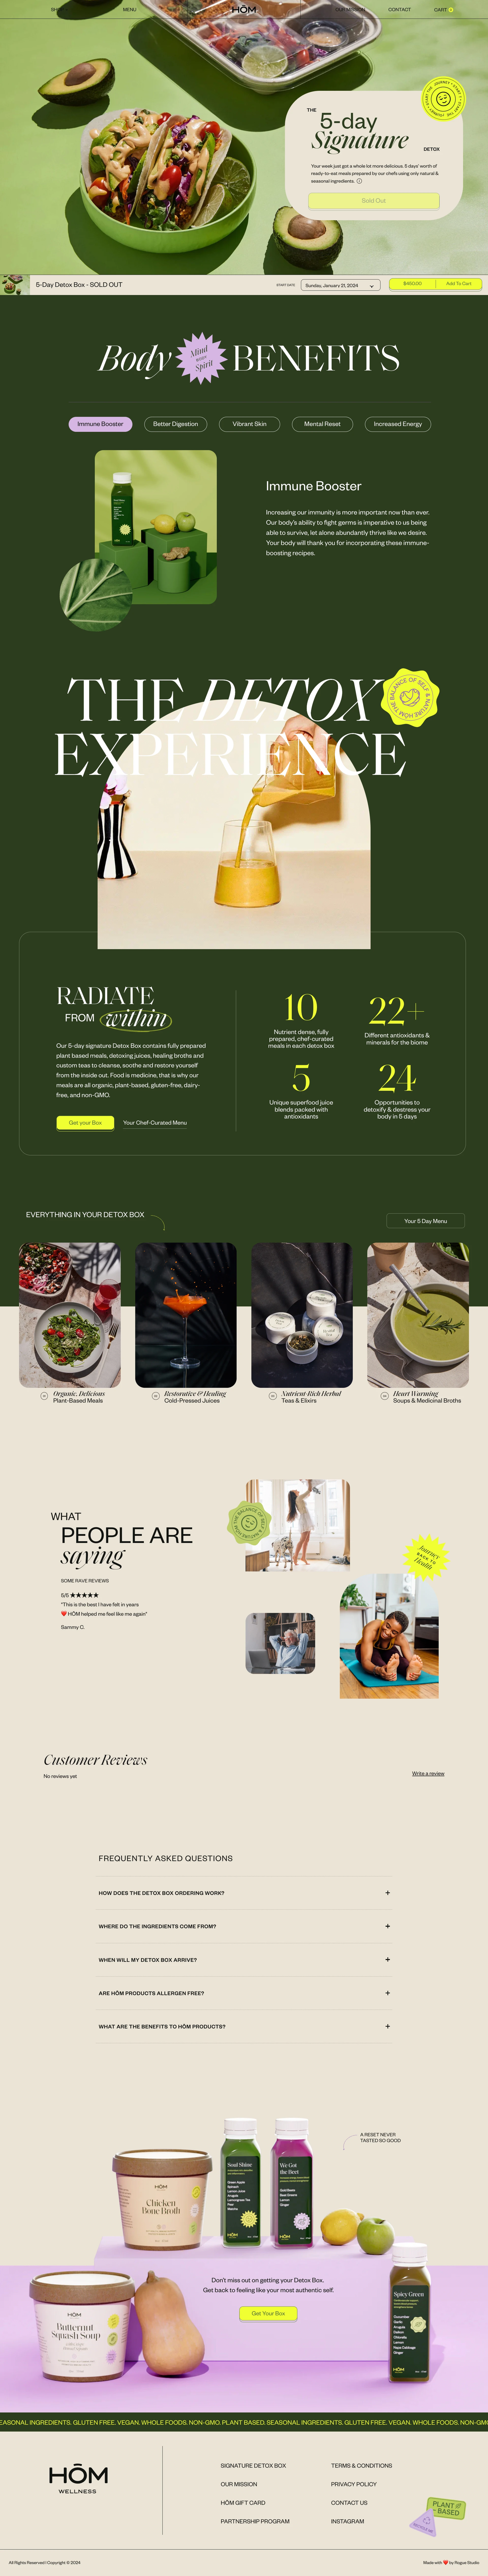 HŌM Wellness Landing Page Example: HŌM connects people to the planet and each other through sustainable, organic nourishment, helping everyone to radiate from within.